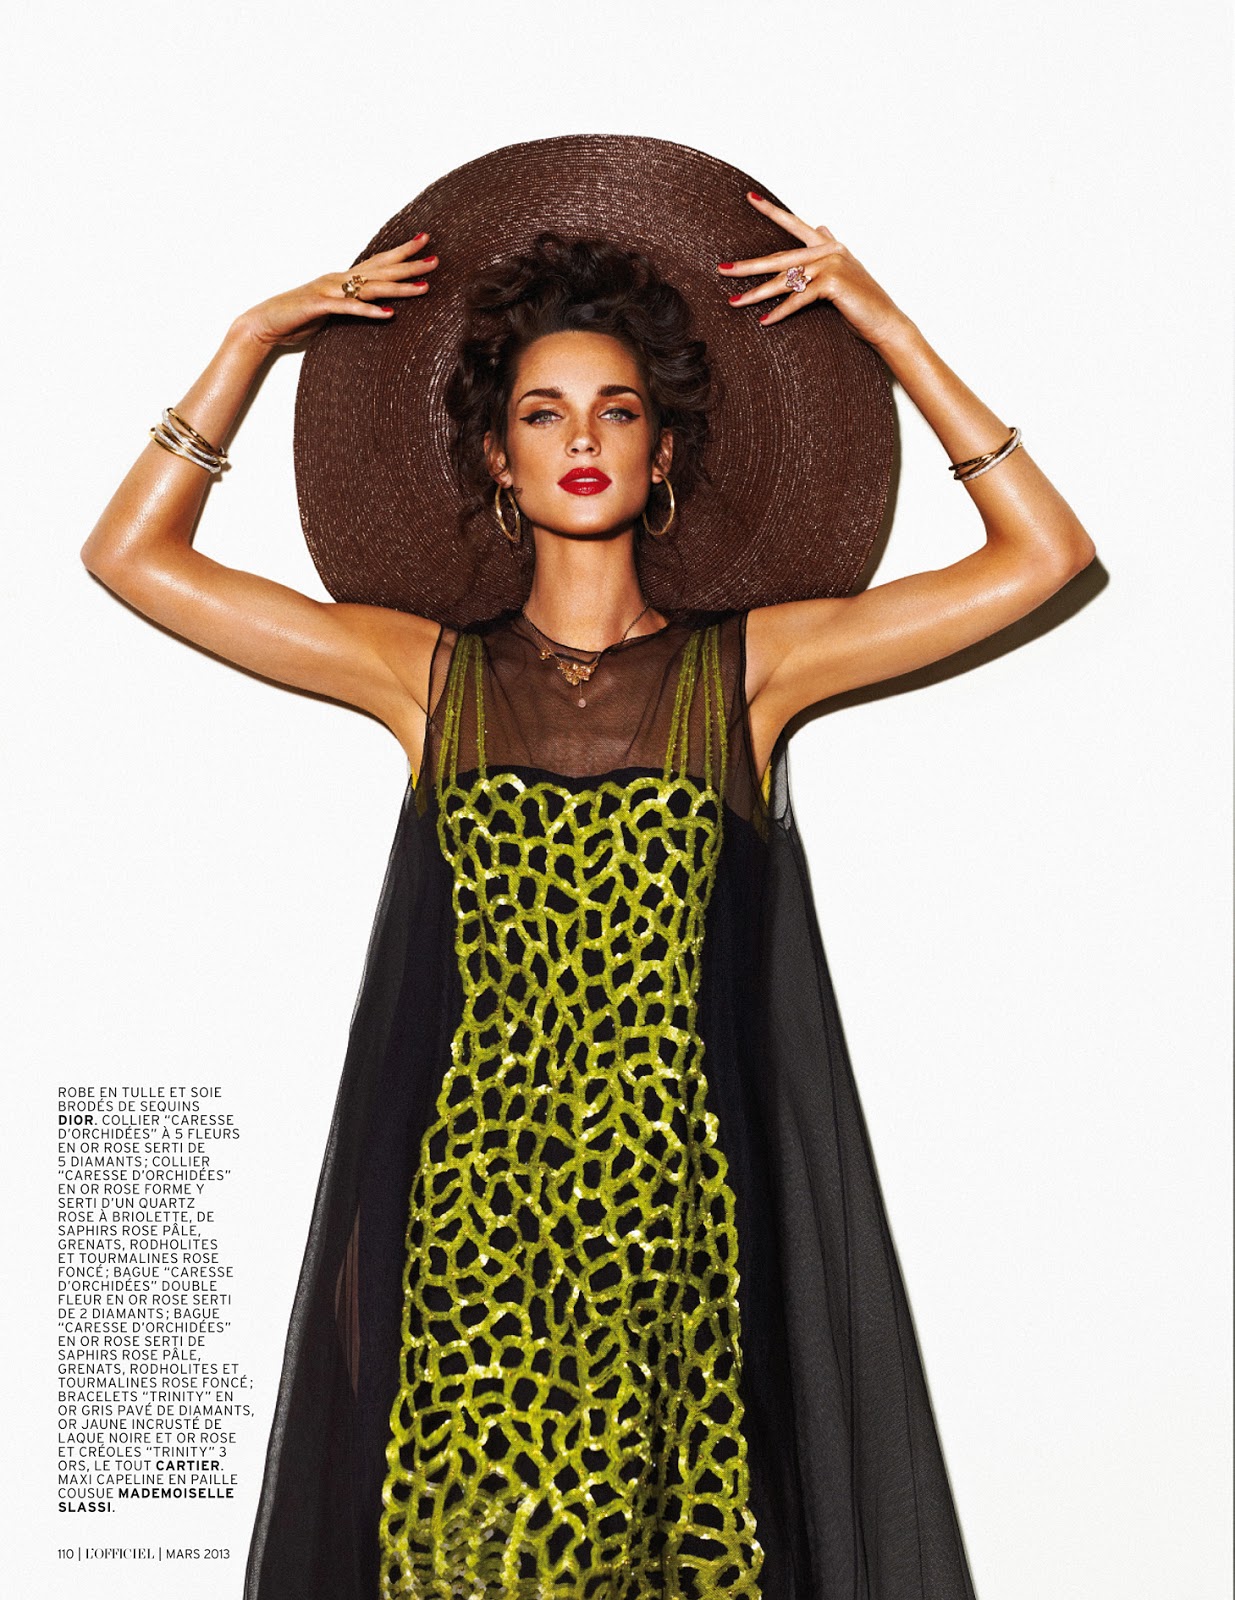 carla crombie by laurence laborie for l'officiel maroc march 2013 ...